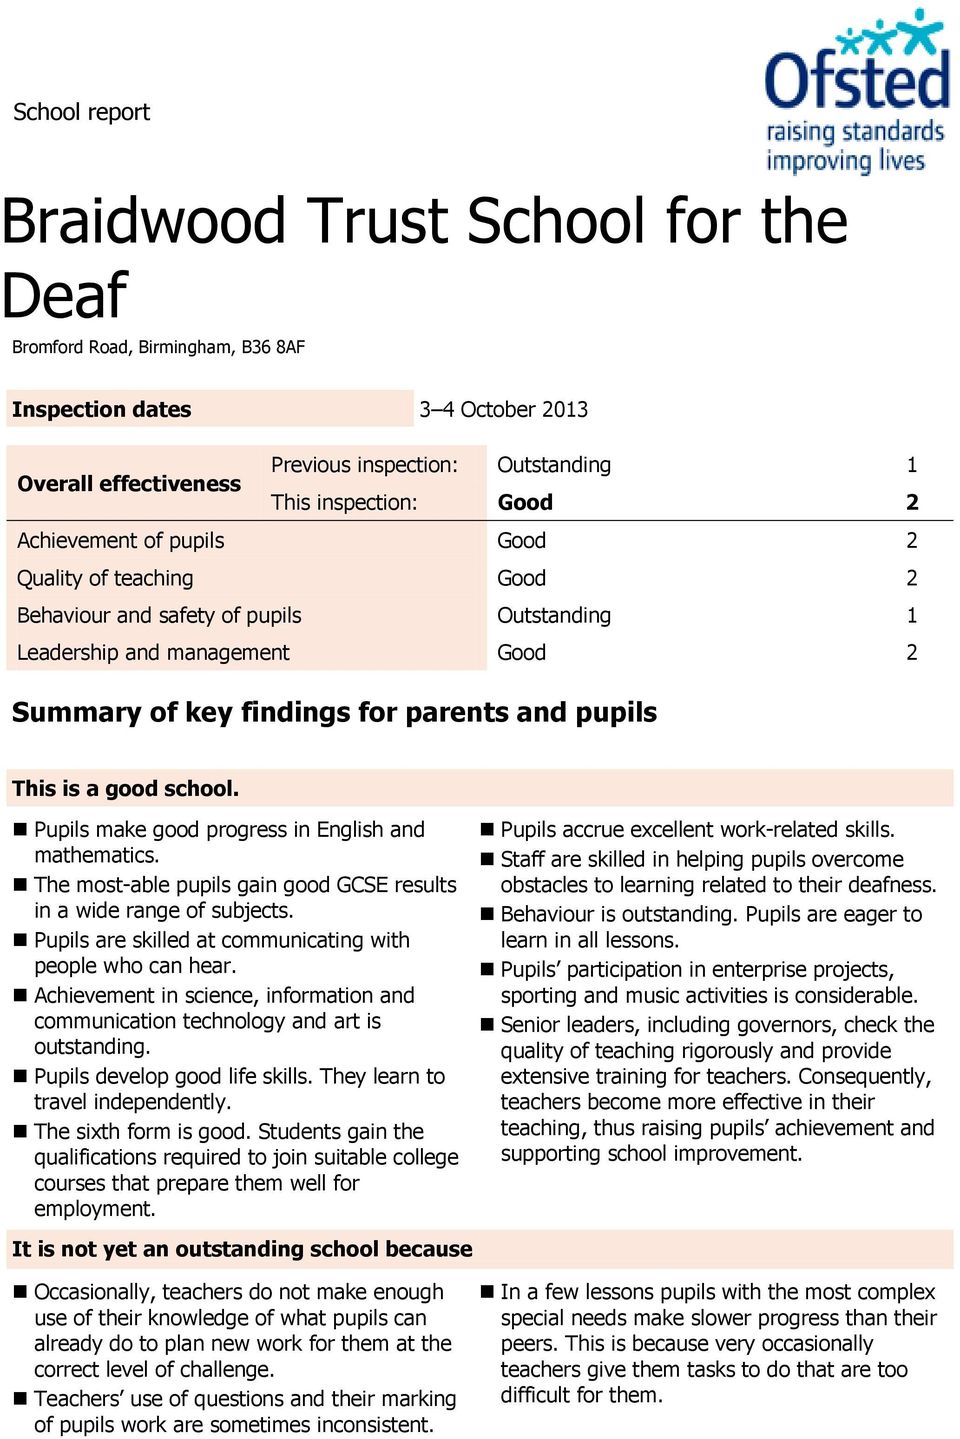 school. Pupils make good progress in English and mathematics. The most-able pupils gain good GCSE results in a wide range of subjects. Pupils are skilled at communicating with people who can hear.